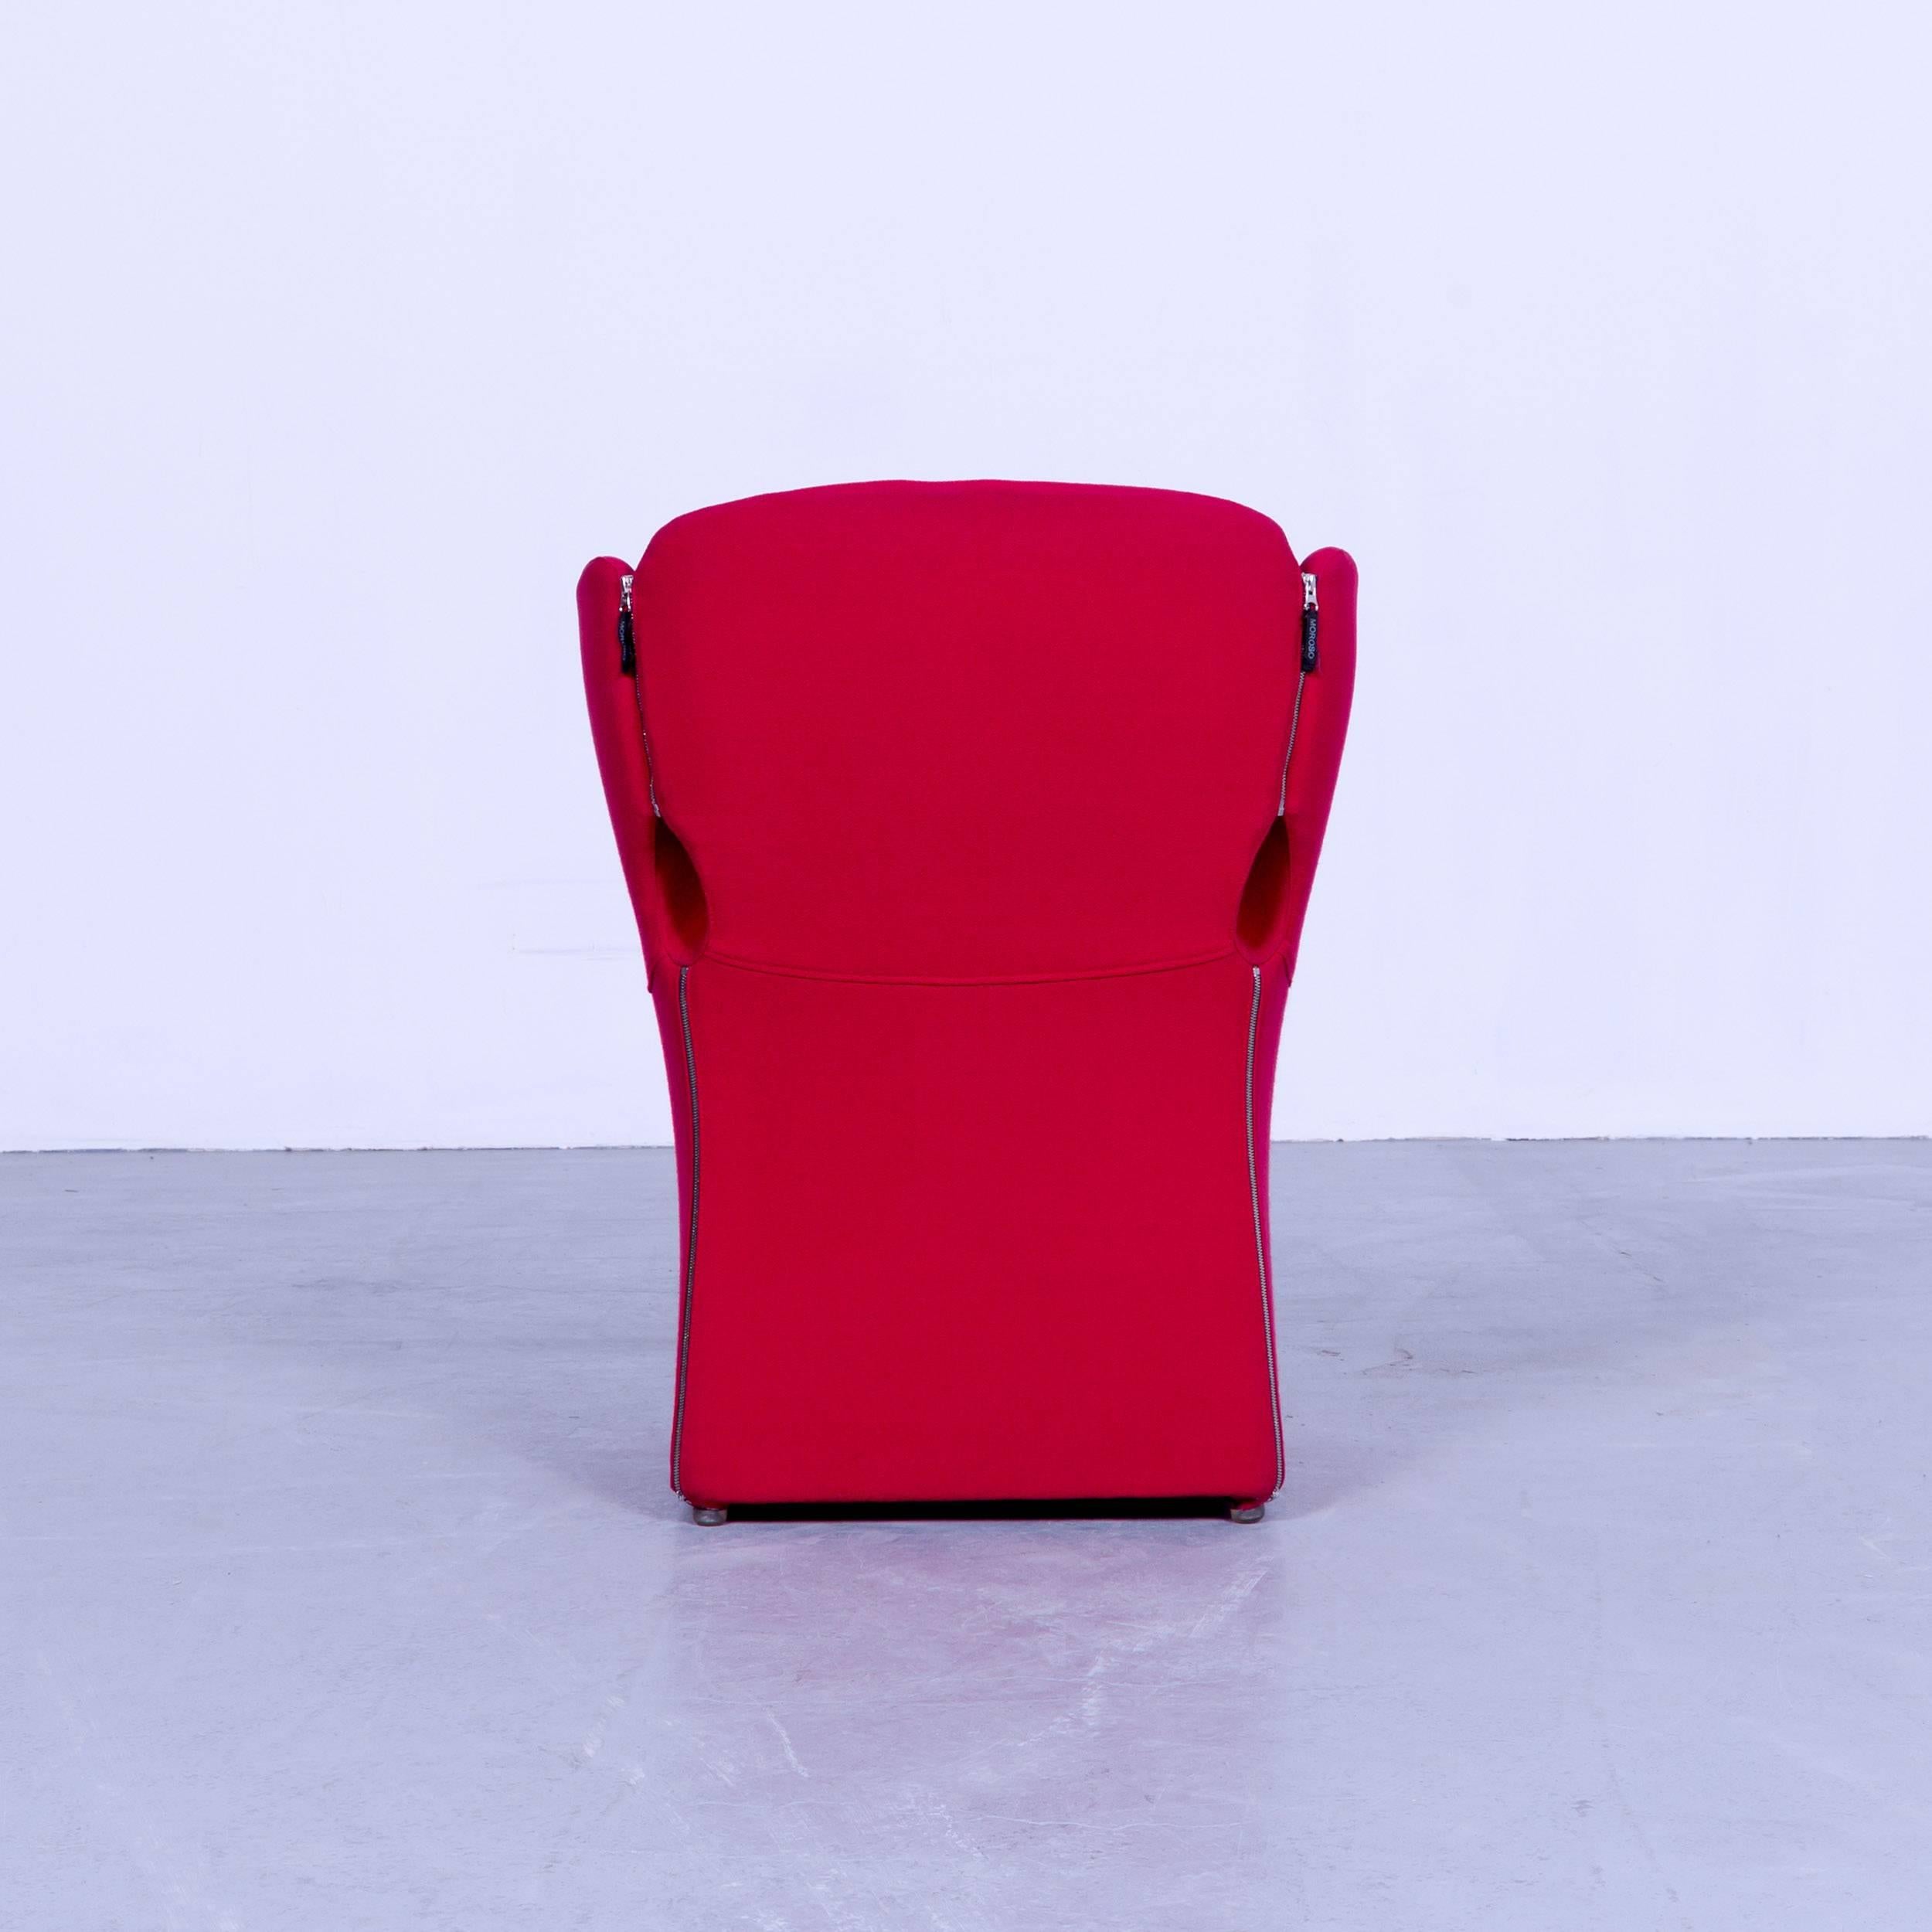 Moroso Bloomy Designer Chair in High Quality Red Fabric by Patricia Urquiola 3